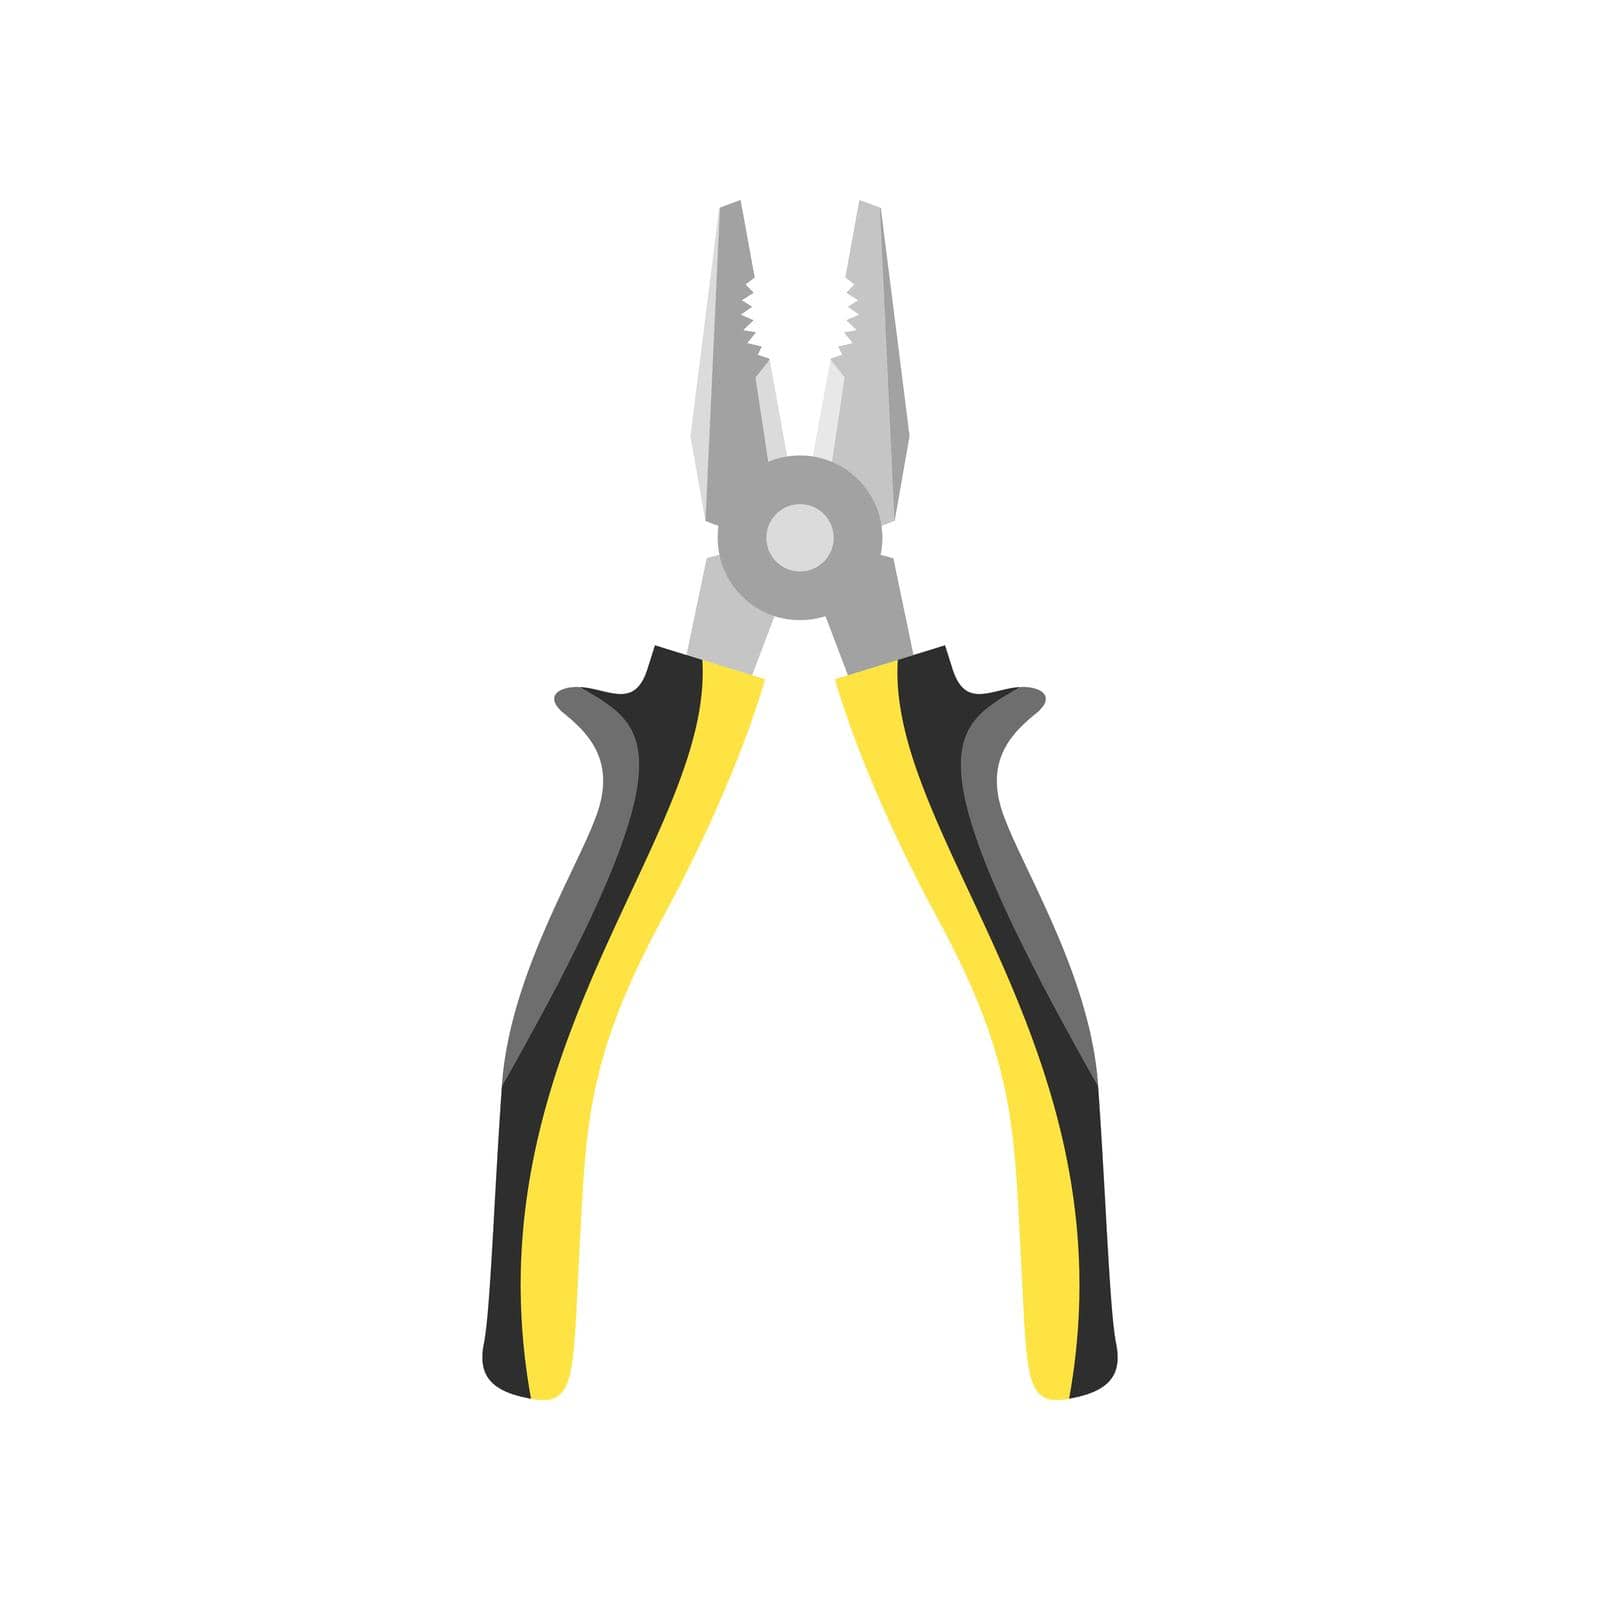 Pliers icon. Hand tool icon. Vector illustration. Color pliers icon by Chekman